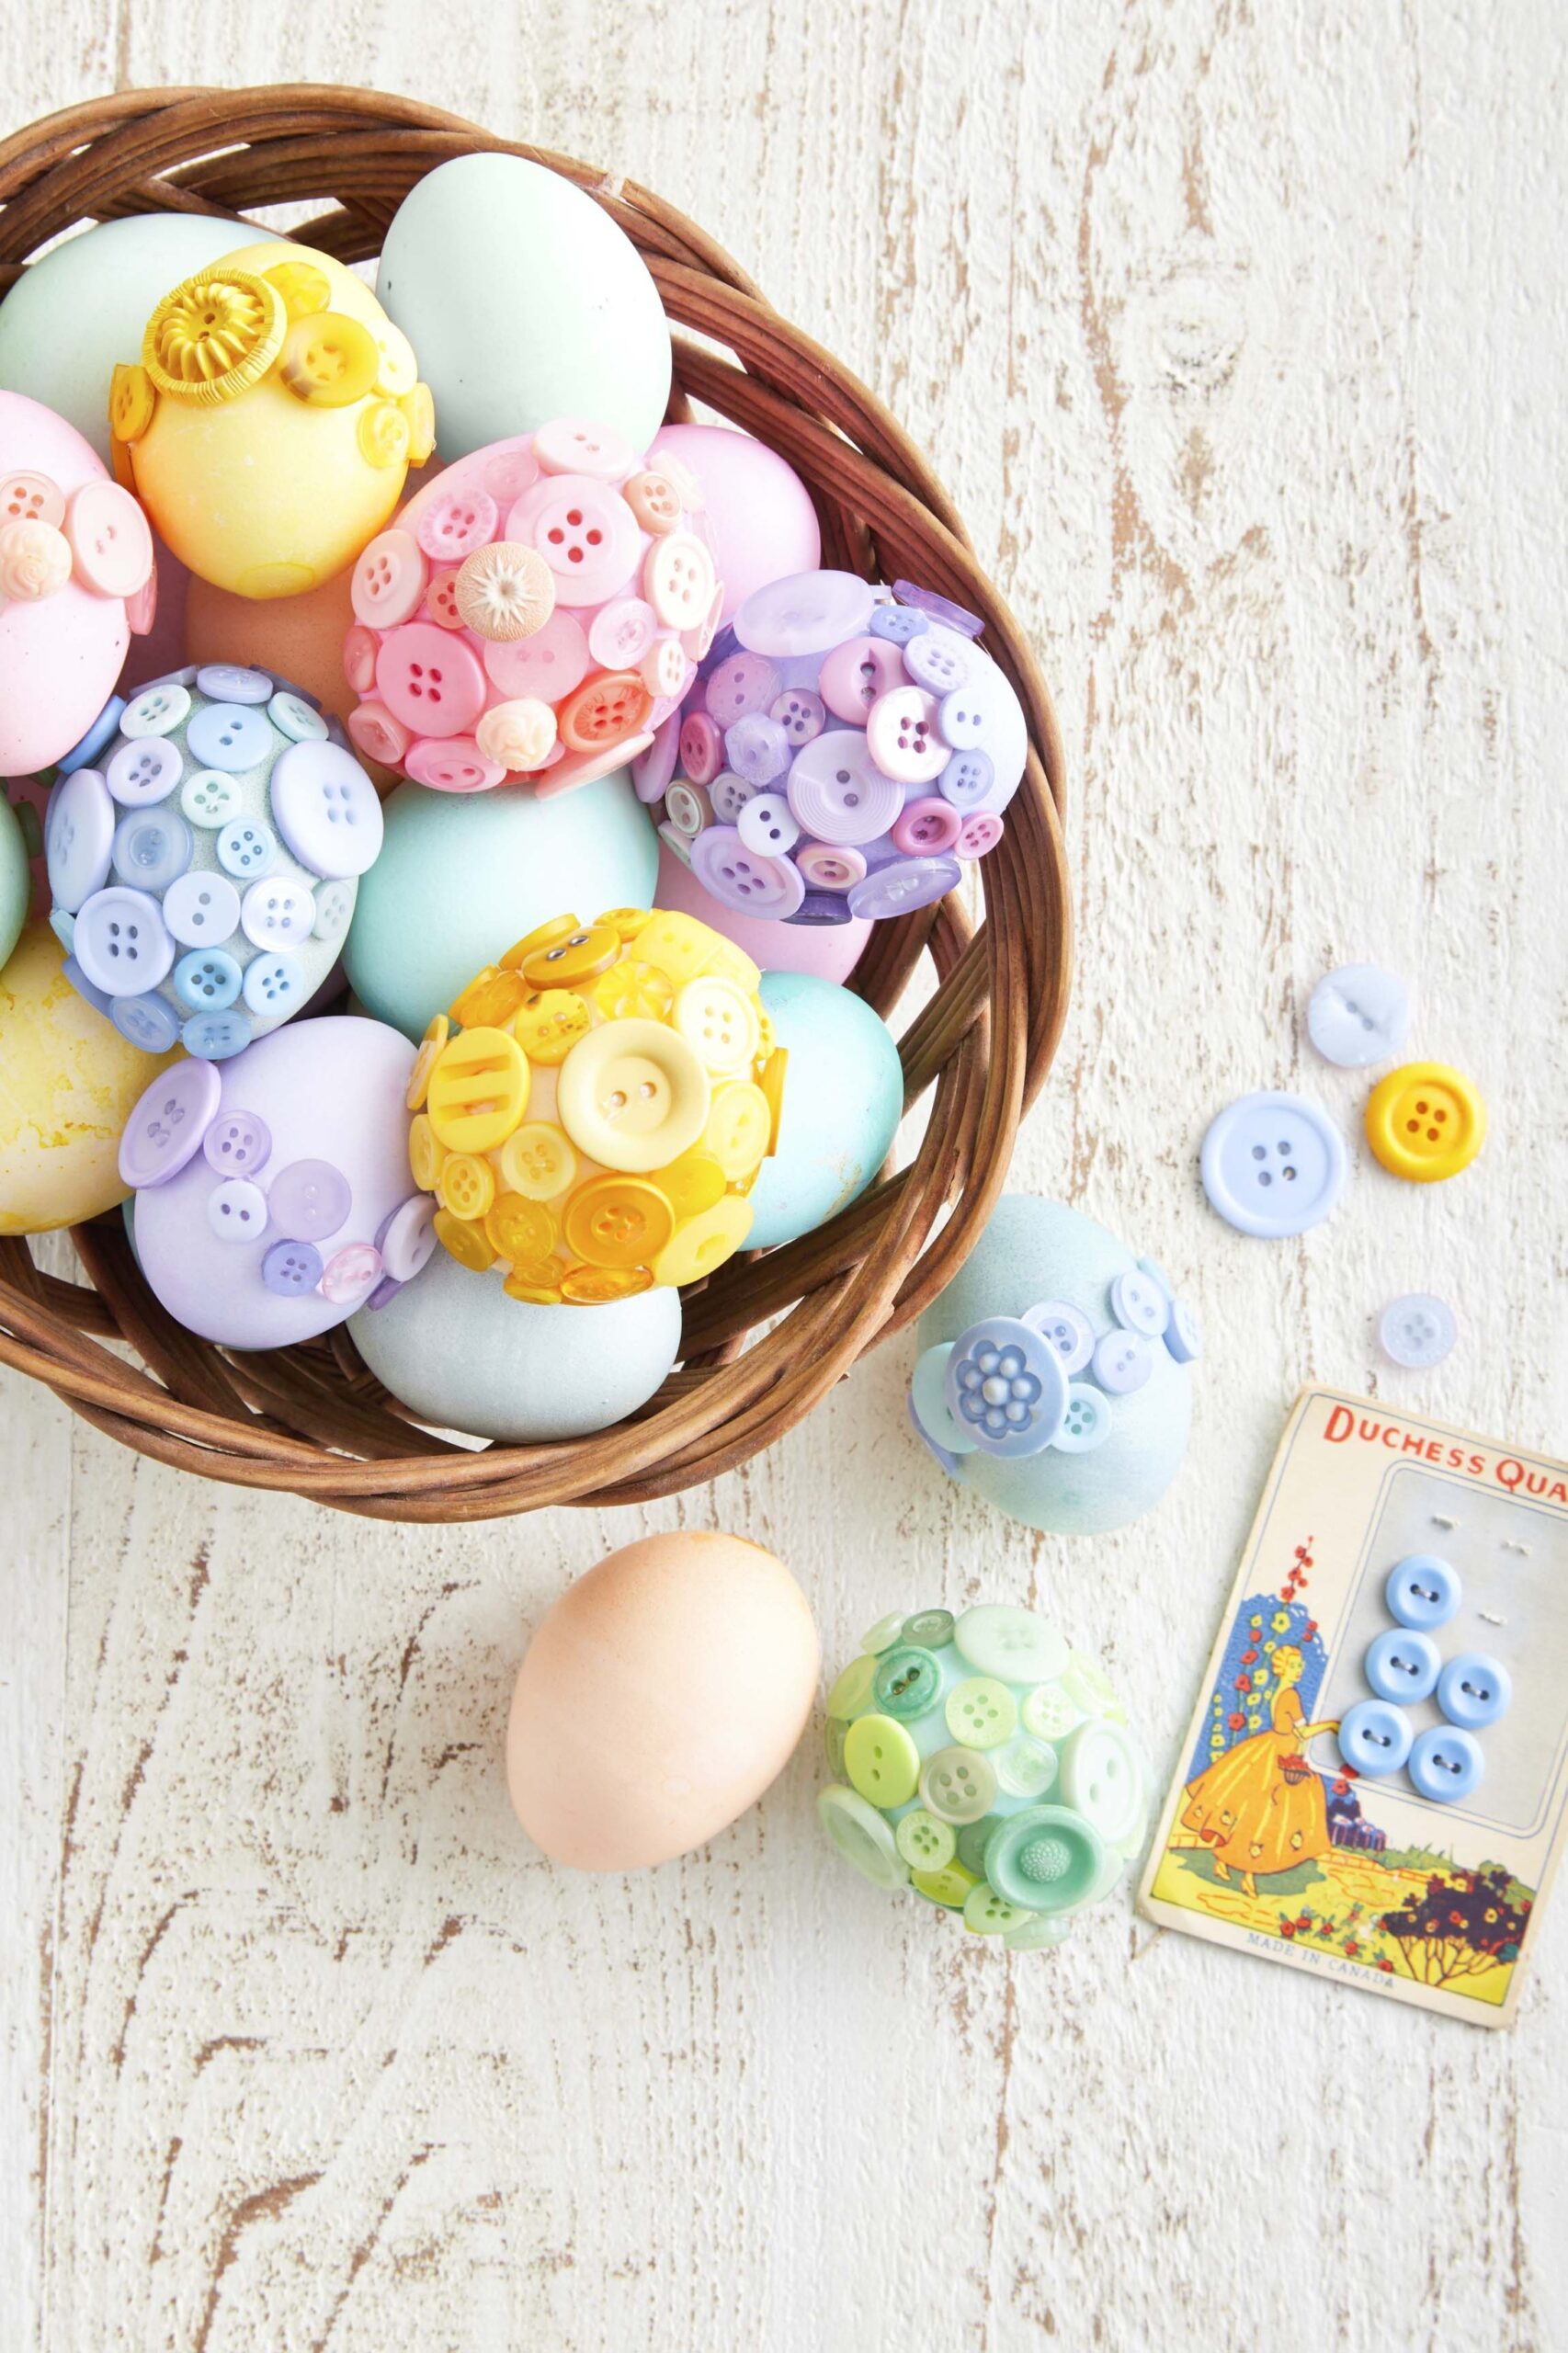 Get Creative With Easter Egg Decorating Ideas For A Fun And Festive Holiday!